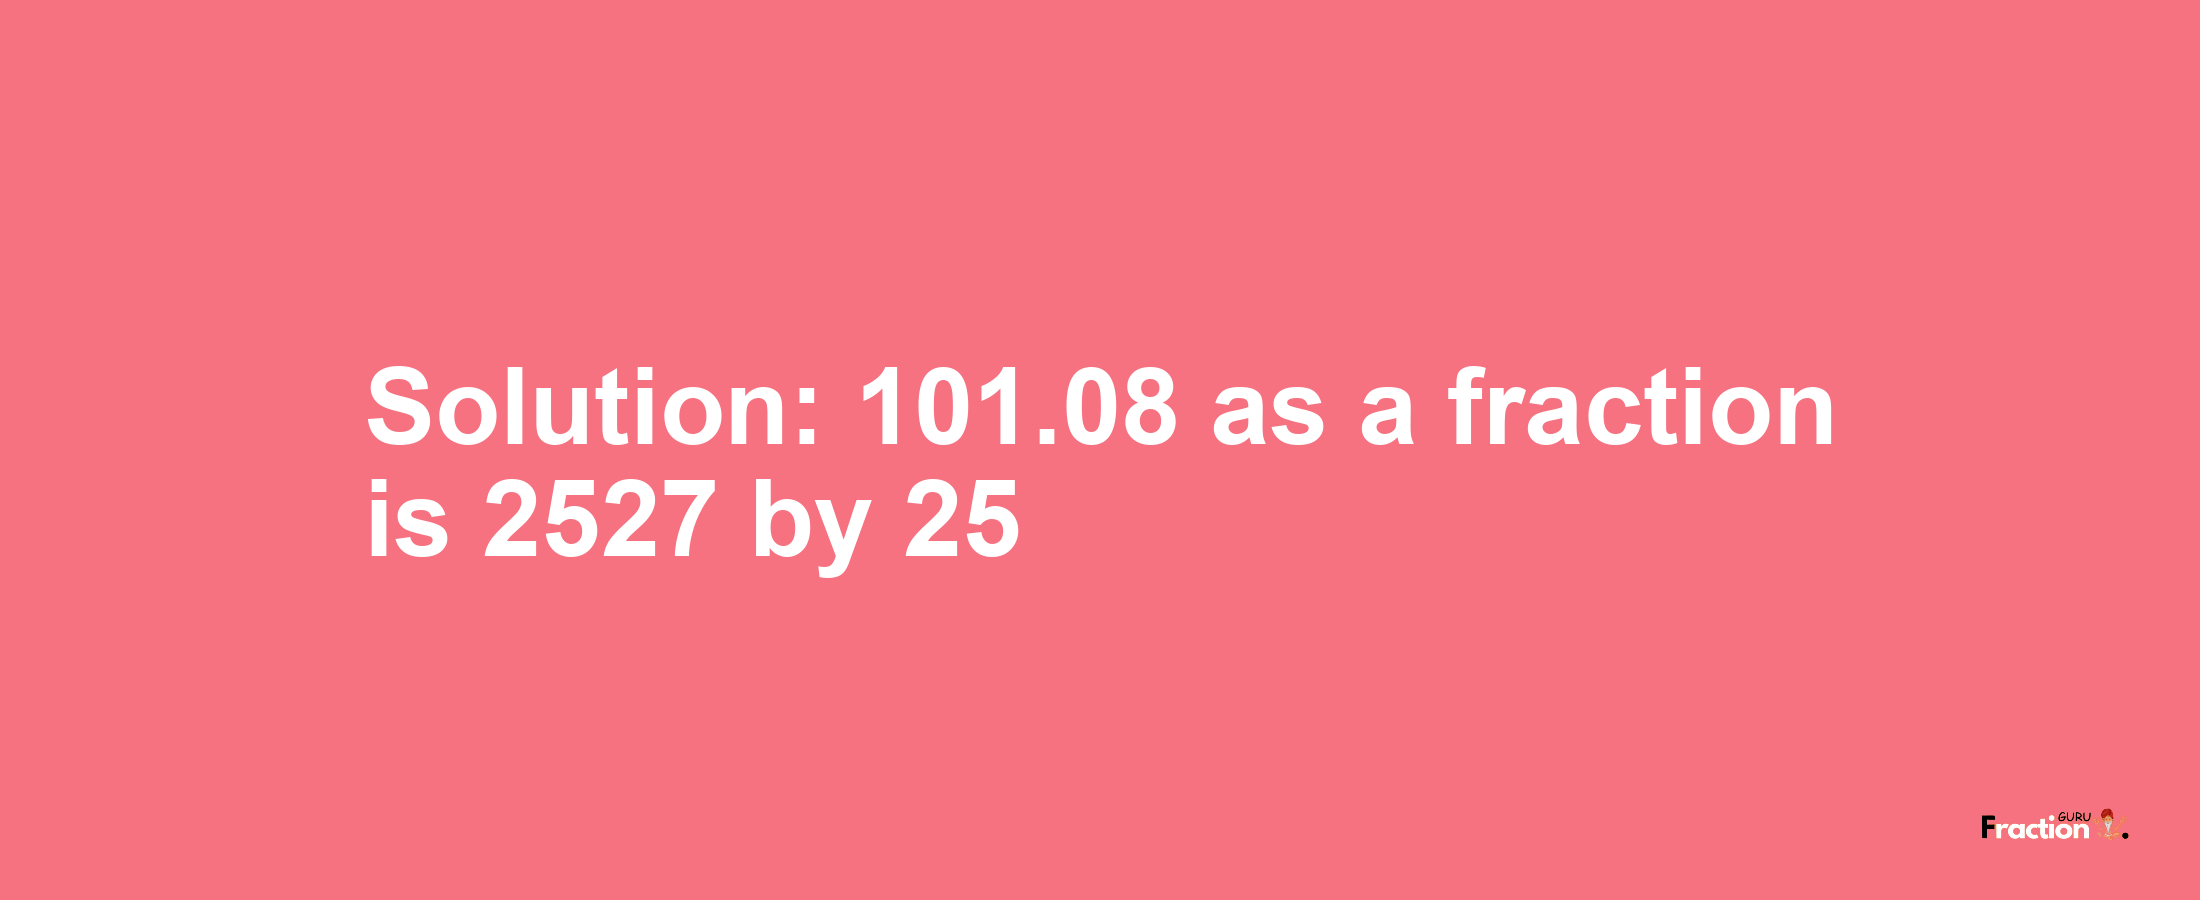 Solution:101.08 as a fraction is 2527/25